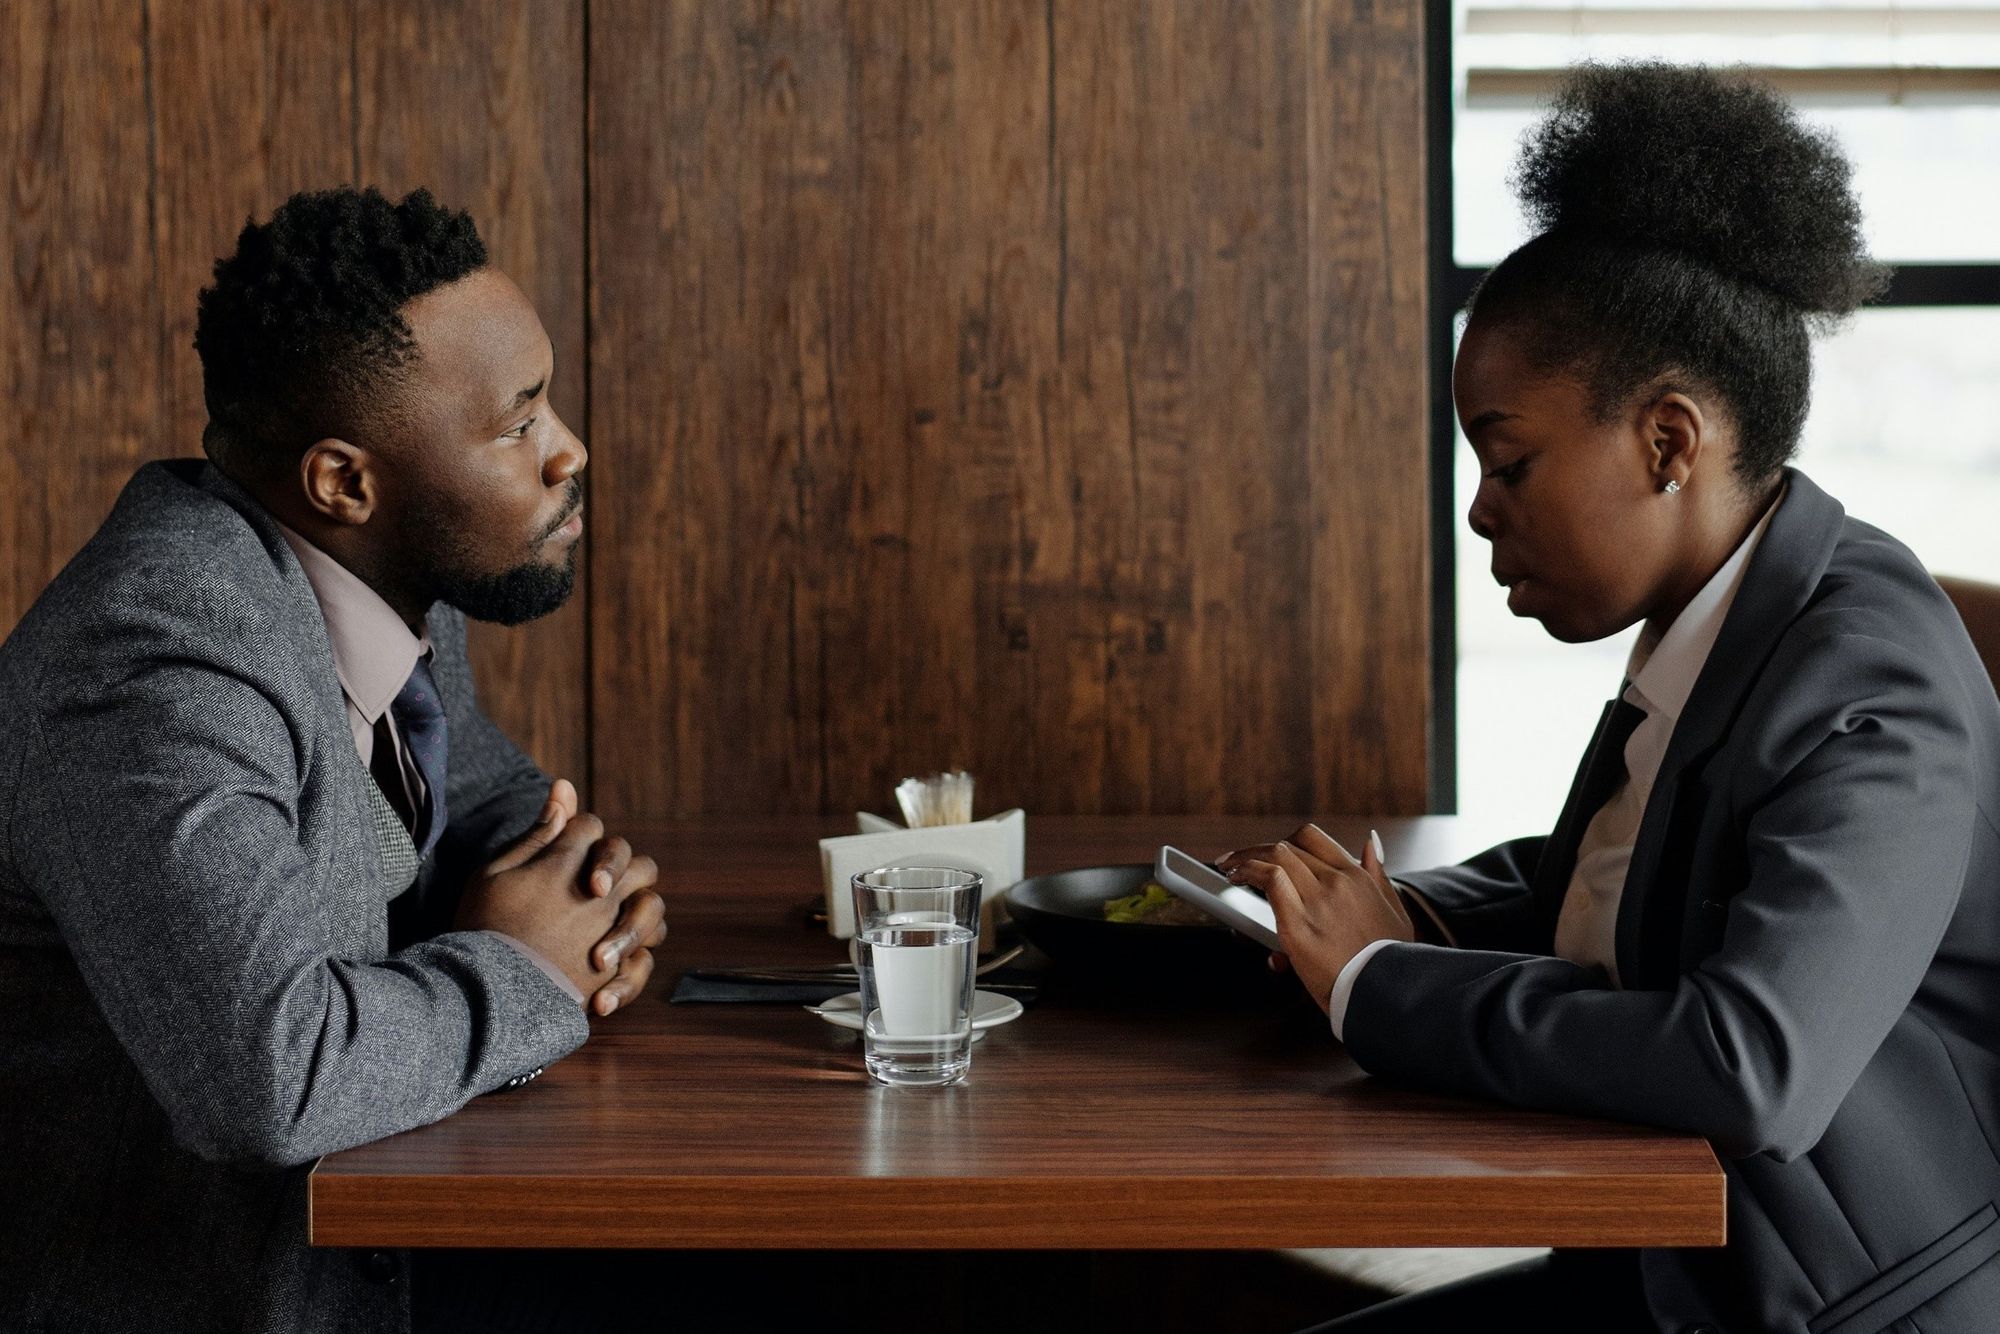 4 useful conversation tips for your first date